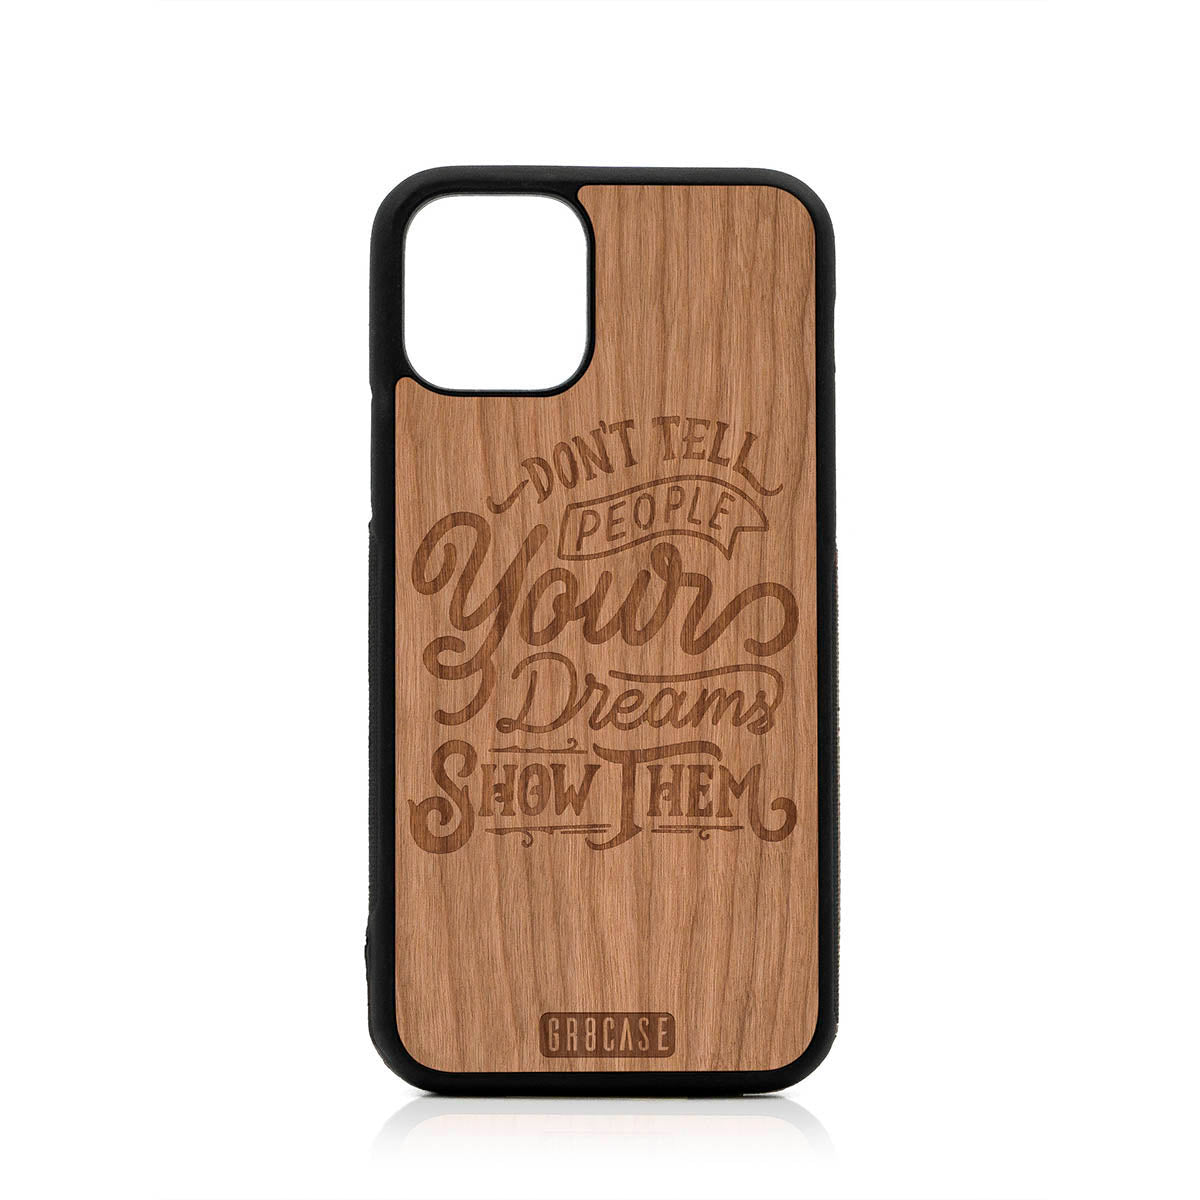 Don't Tell People Your Dreams Show Them Design Wood Case For iPhone 11 Pro by GR8CASE